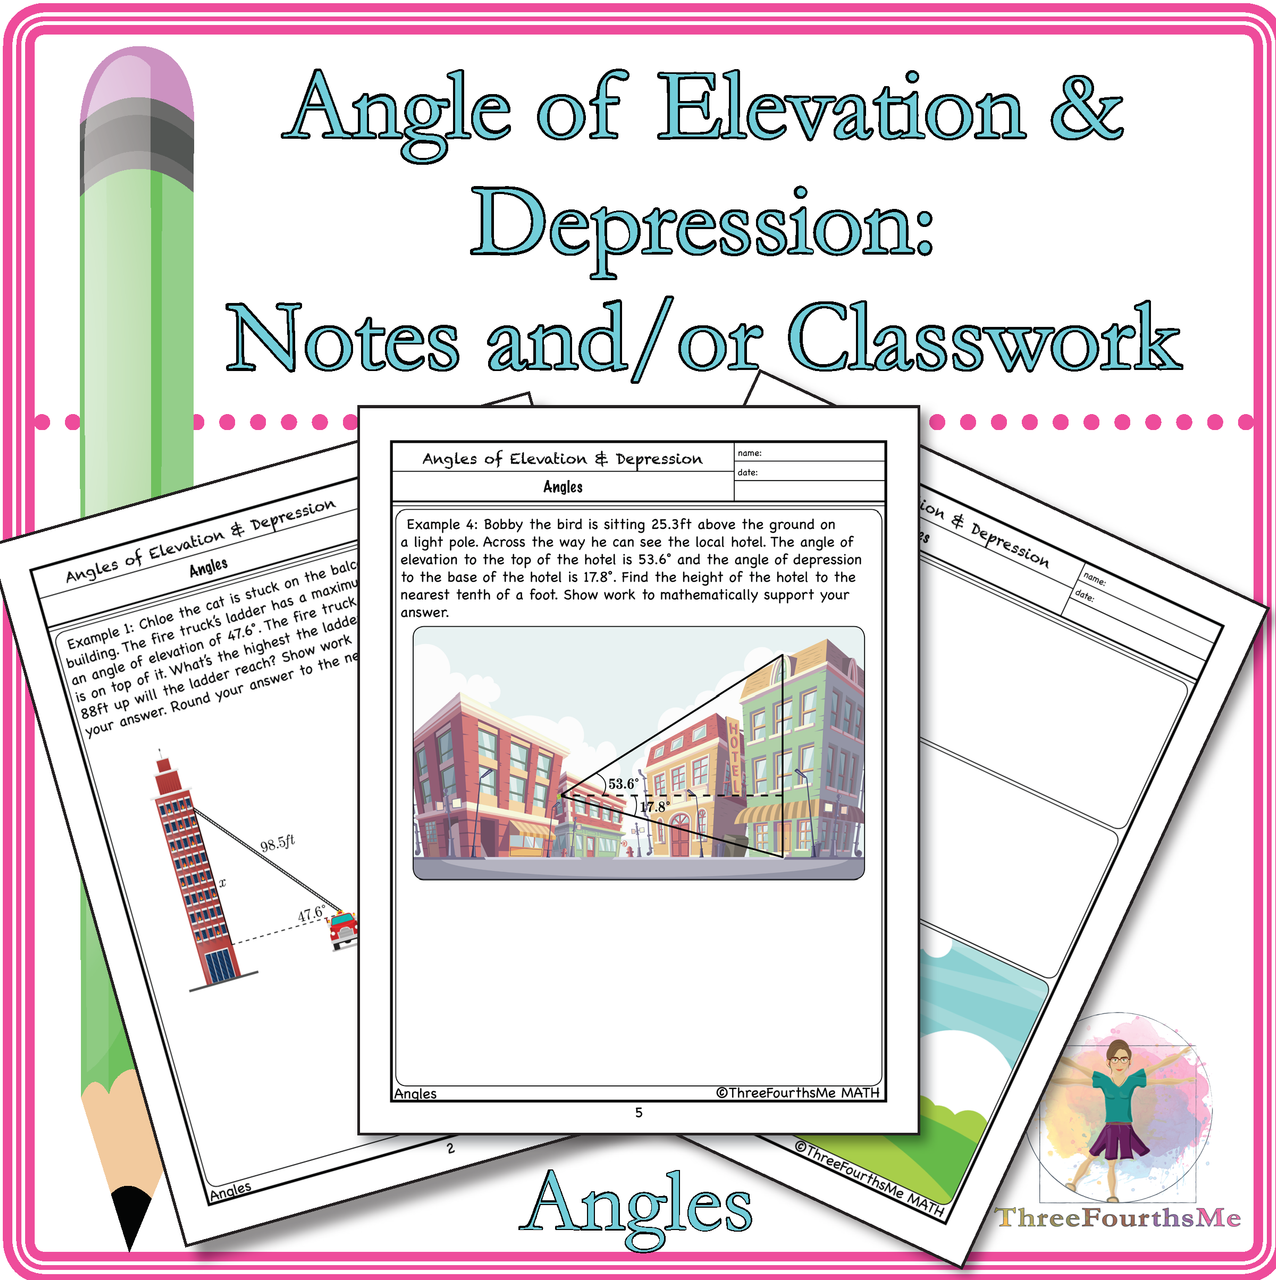 Angles of Elevation and Depression Scaffolded Notes & Classwork